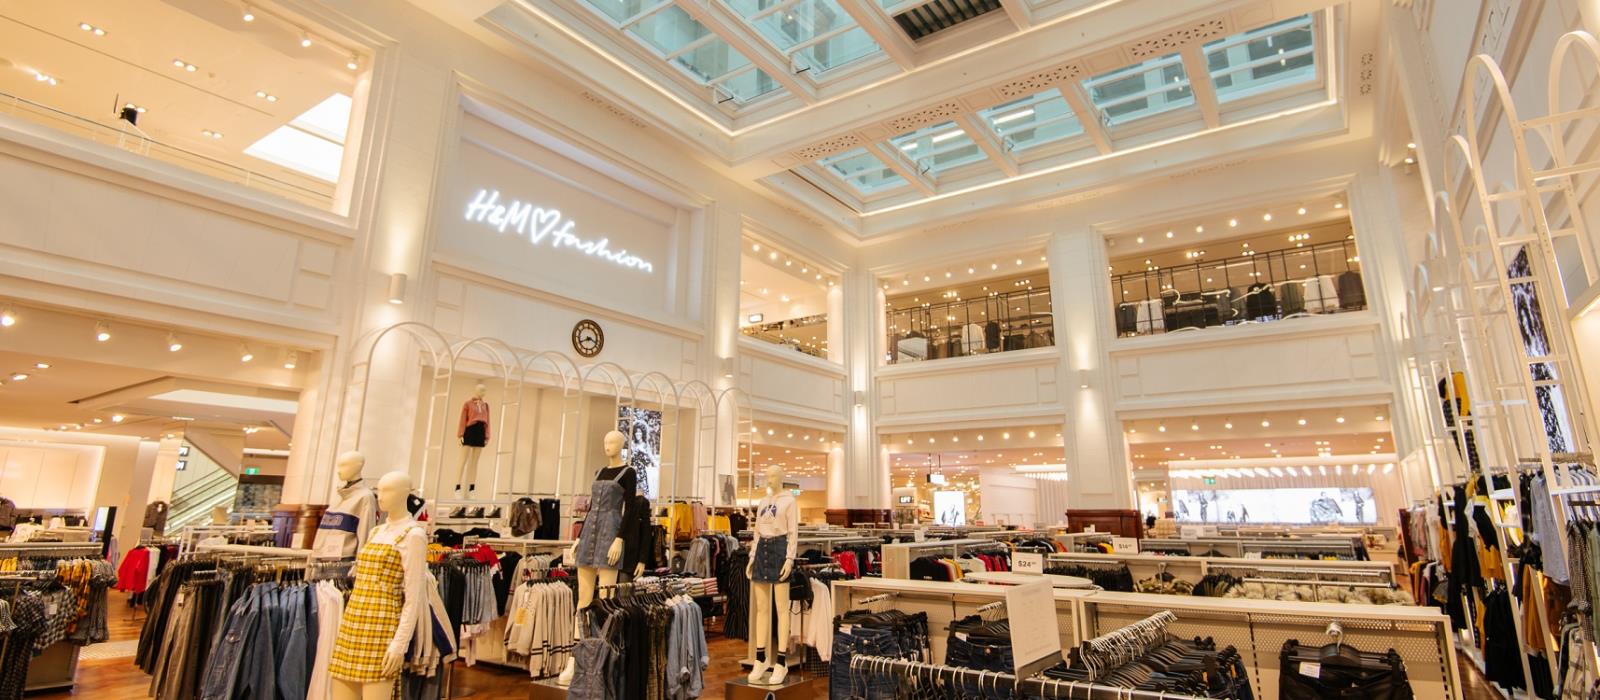 Inside one of Perth City’s shopping destinations, H&M